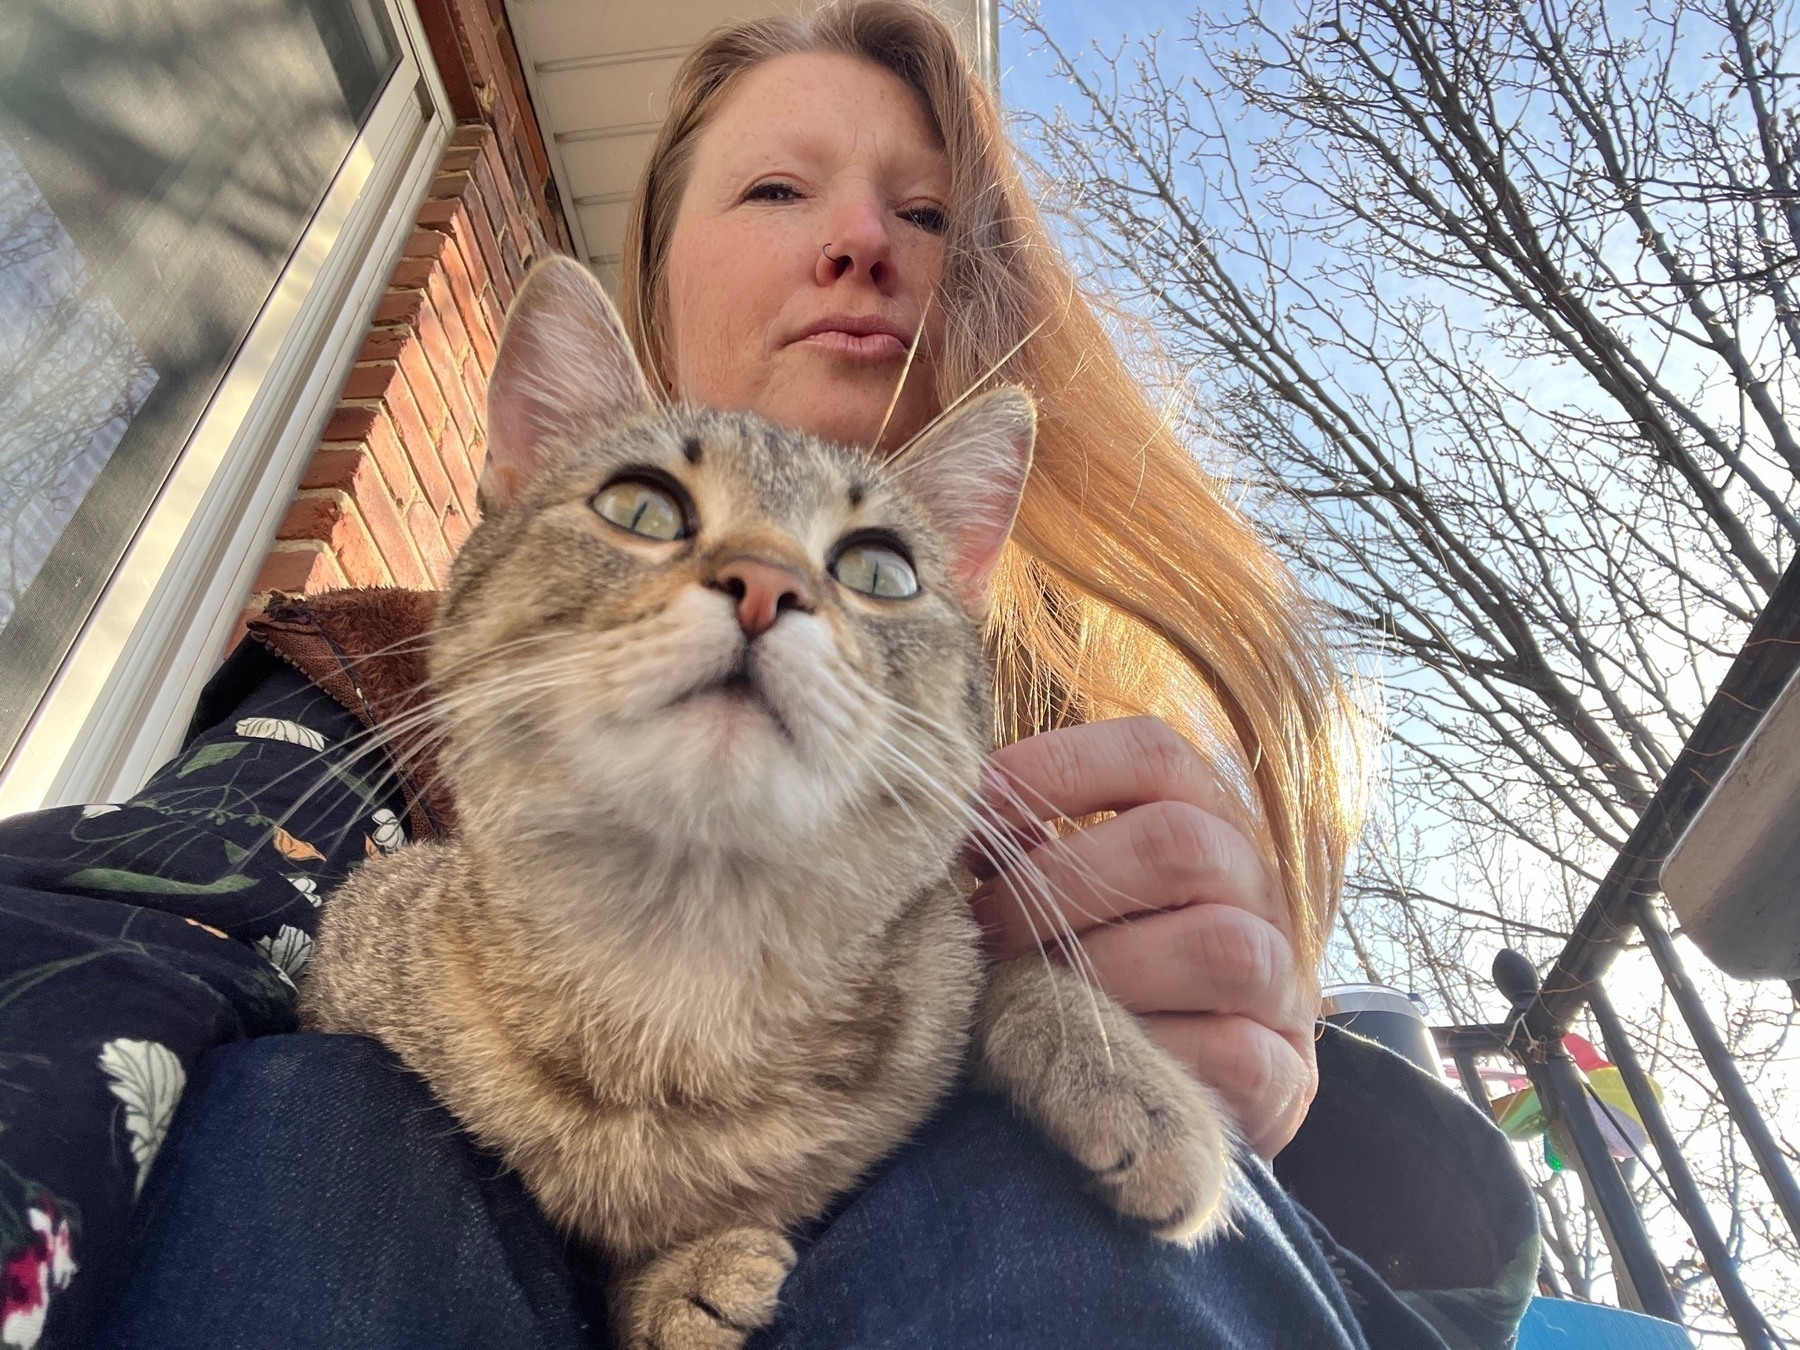 A closer view of a small gray tabby cat with wide eyes looking up from a woman's lap, with sky behind them 